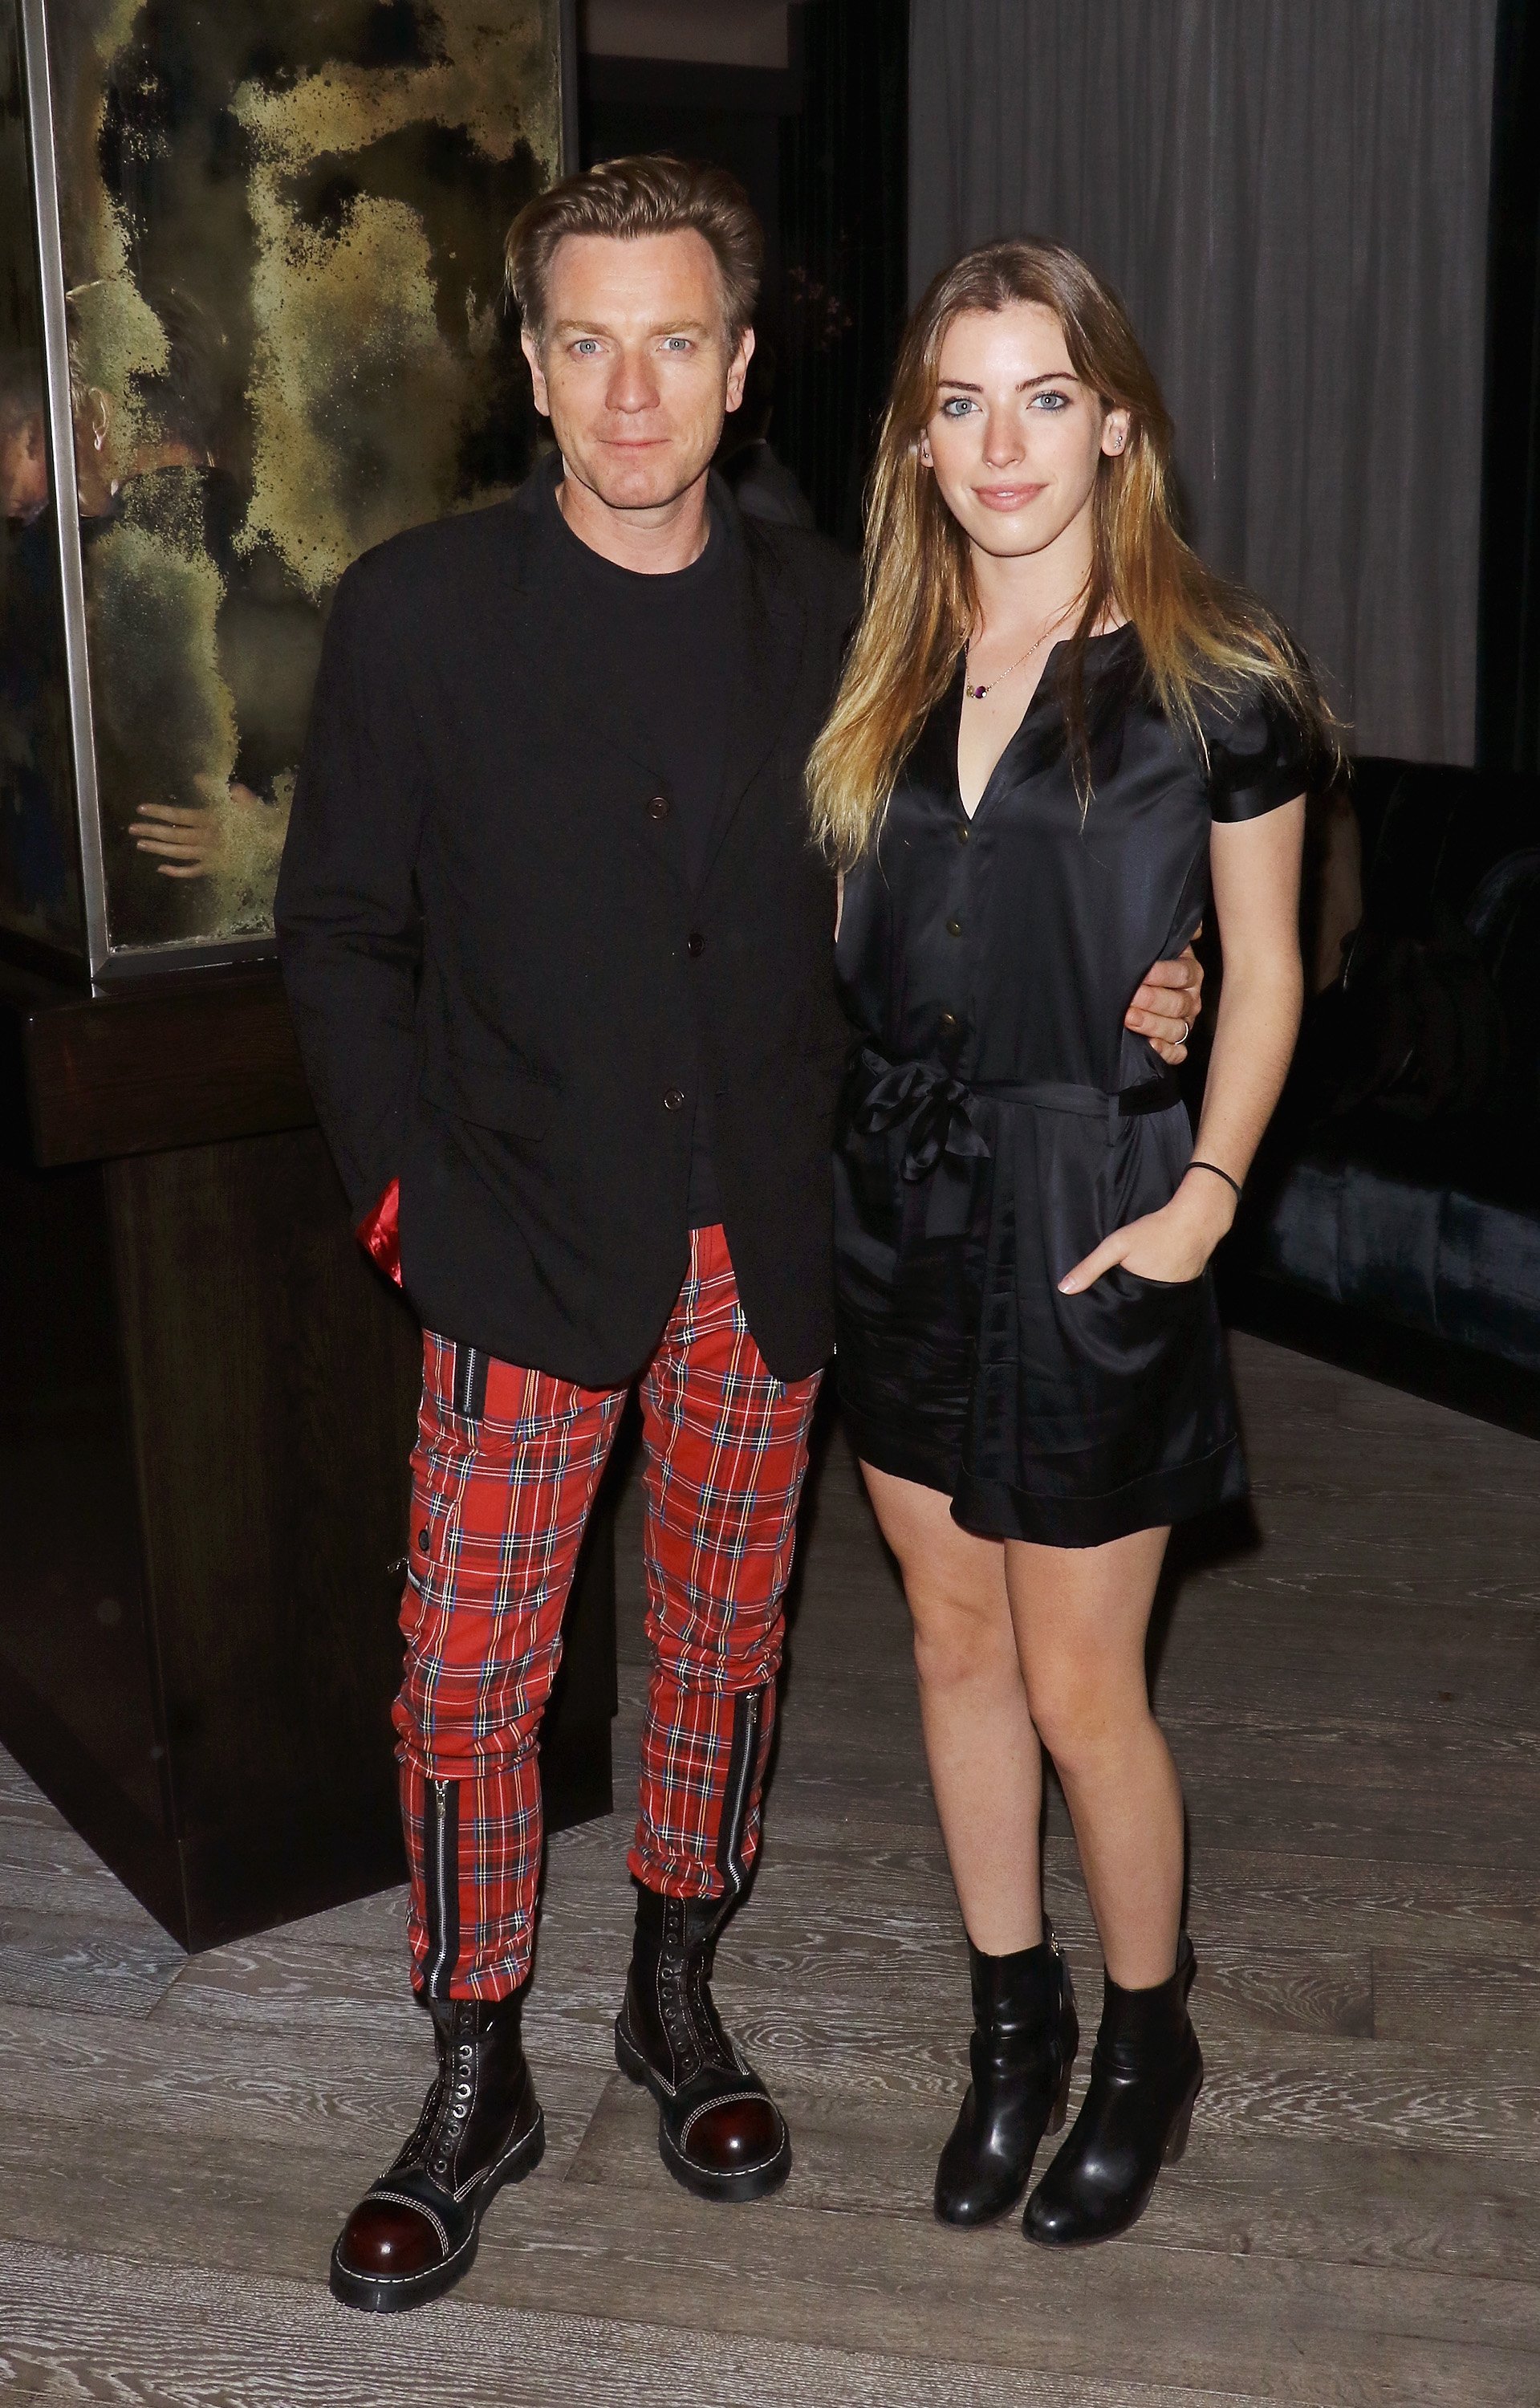 Ewan McGregor and his daughter Clara McGregor at the screening of "Miles Ahead" in New York on March 23, 2016 | Source: Getty Images 